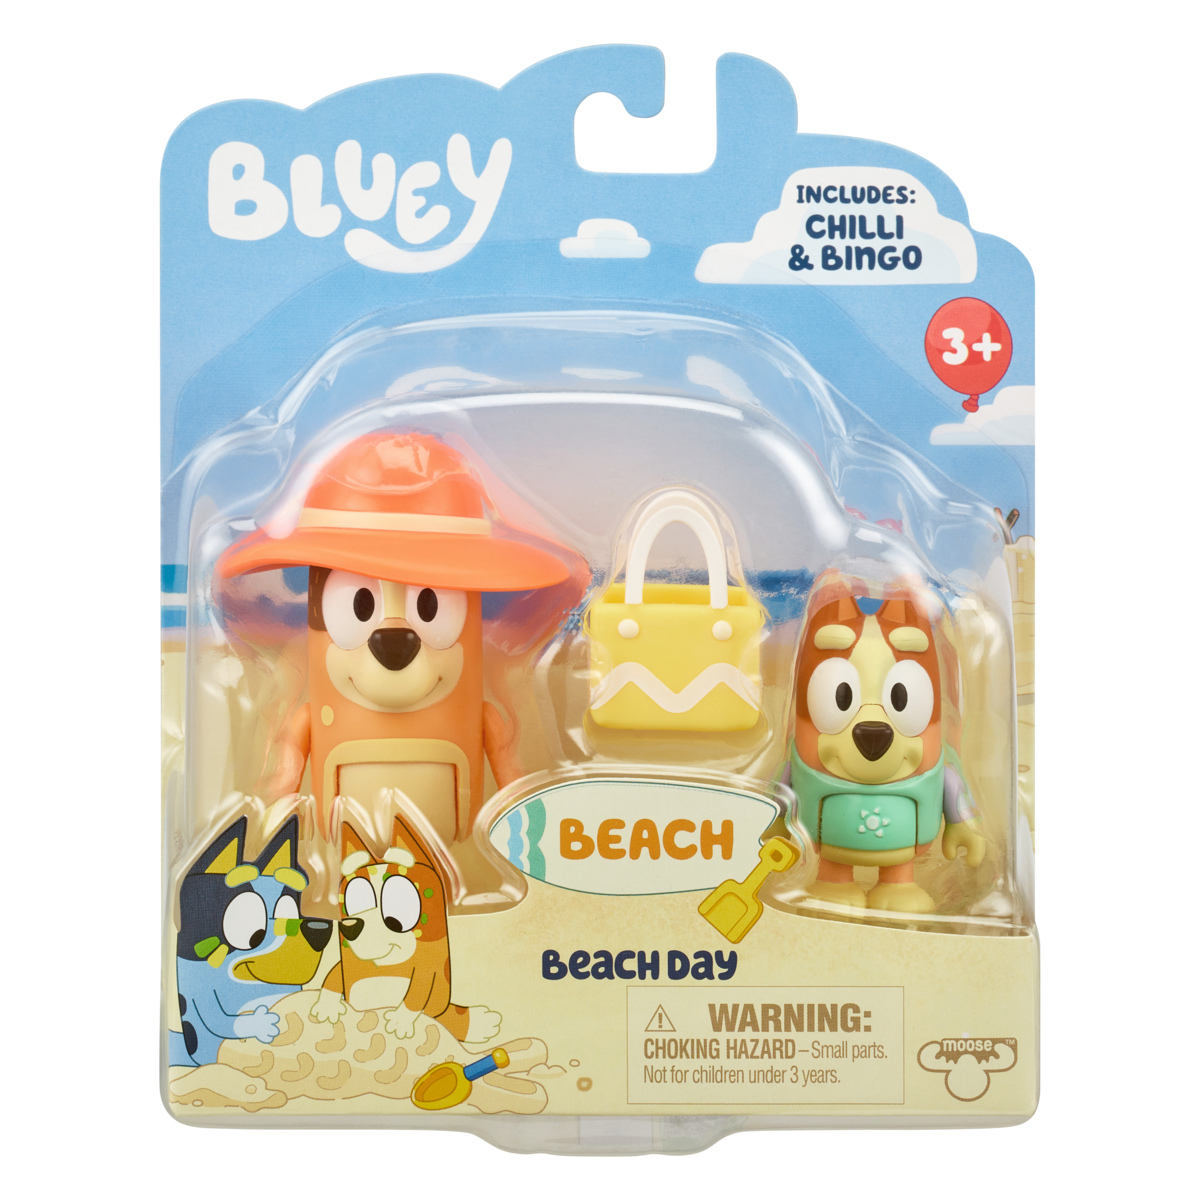 Bluey & Friends 8-Pack Figurines - Bluey Official Website